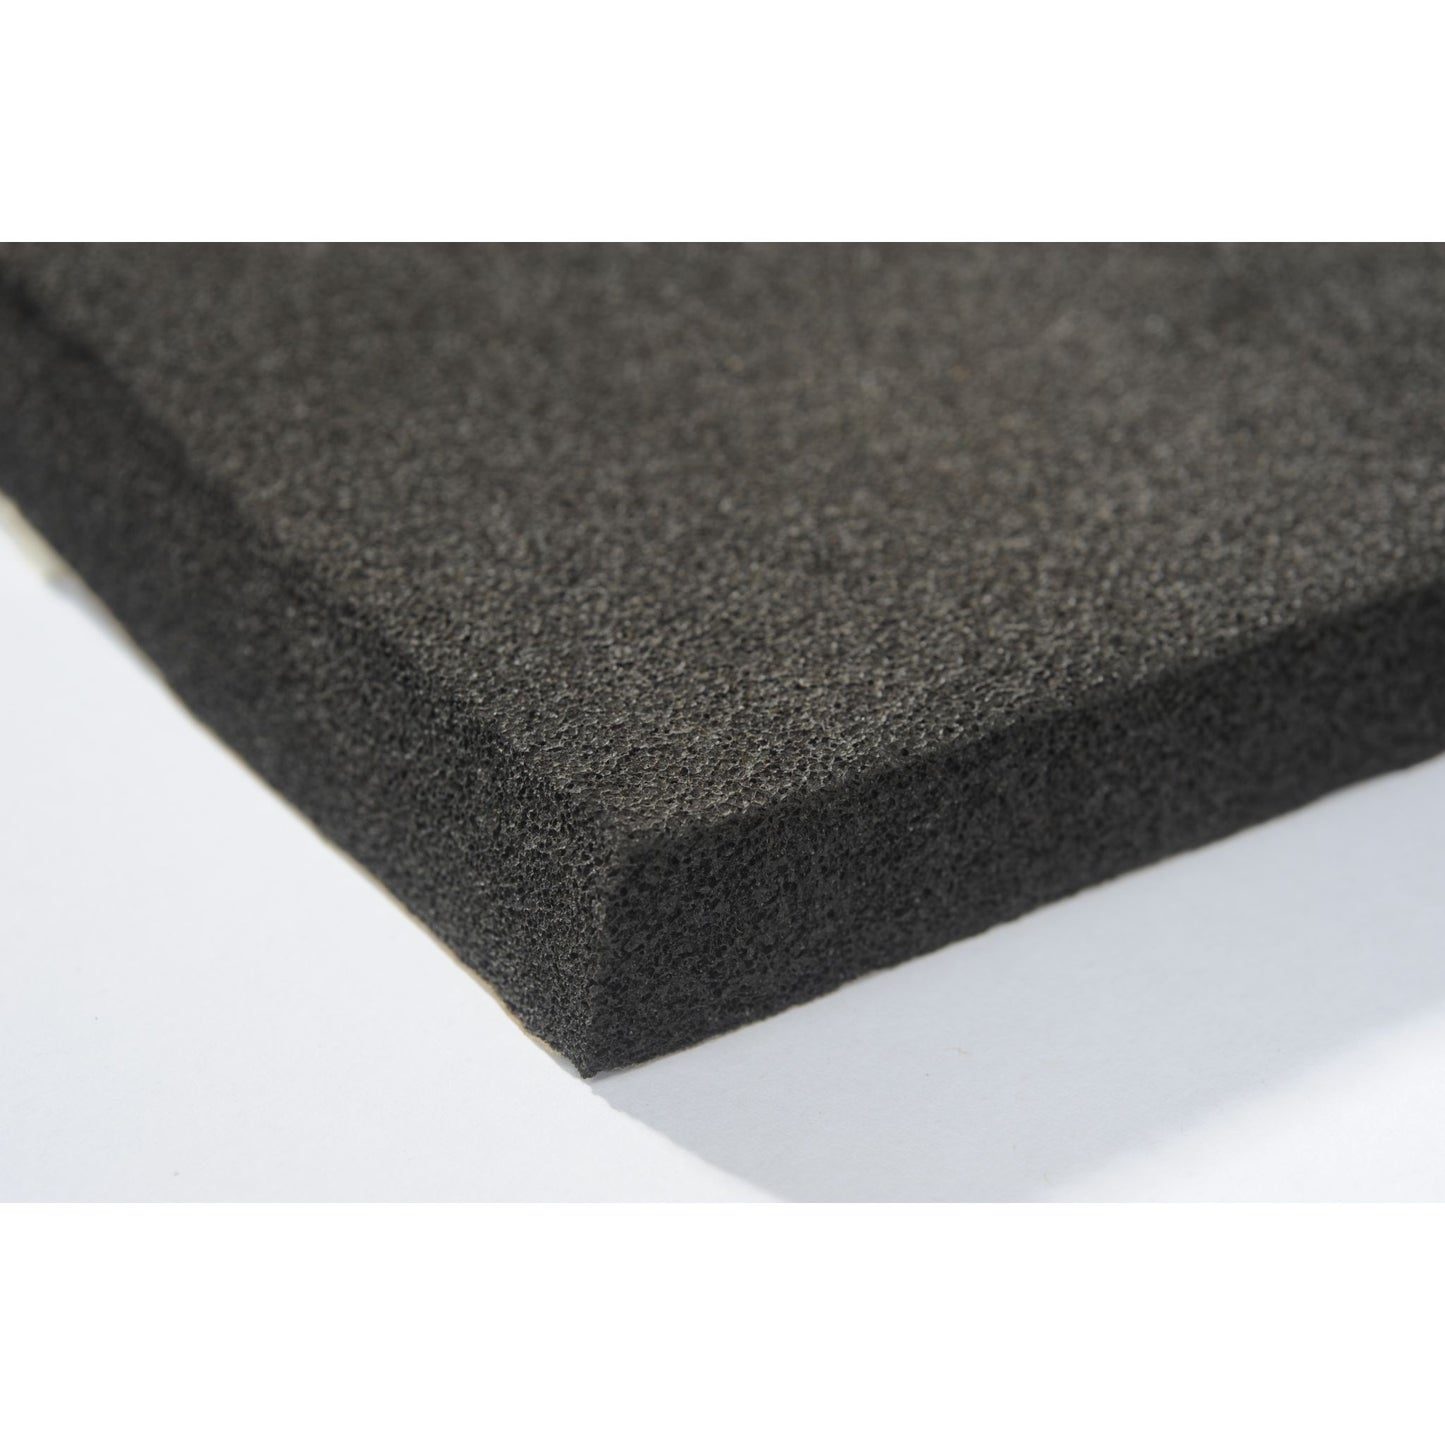 Hushmat Under Carpet Floor Kit - 1/2in Silencer Megabond Thermal Insulating and Sound Absorbing Self-Adhesive Foam-2 Sheets 23inx36in ea 11.5 sq ft 20300